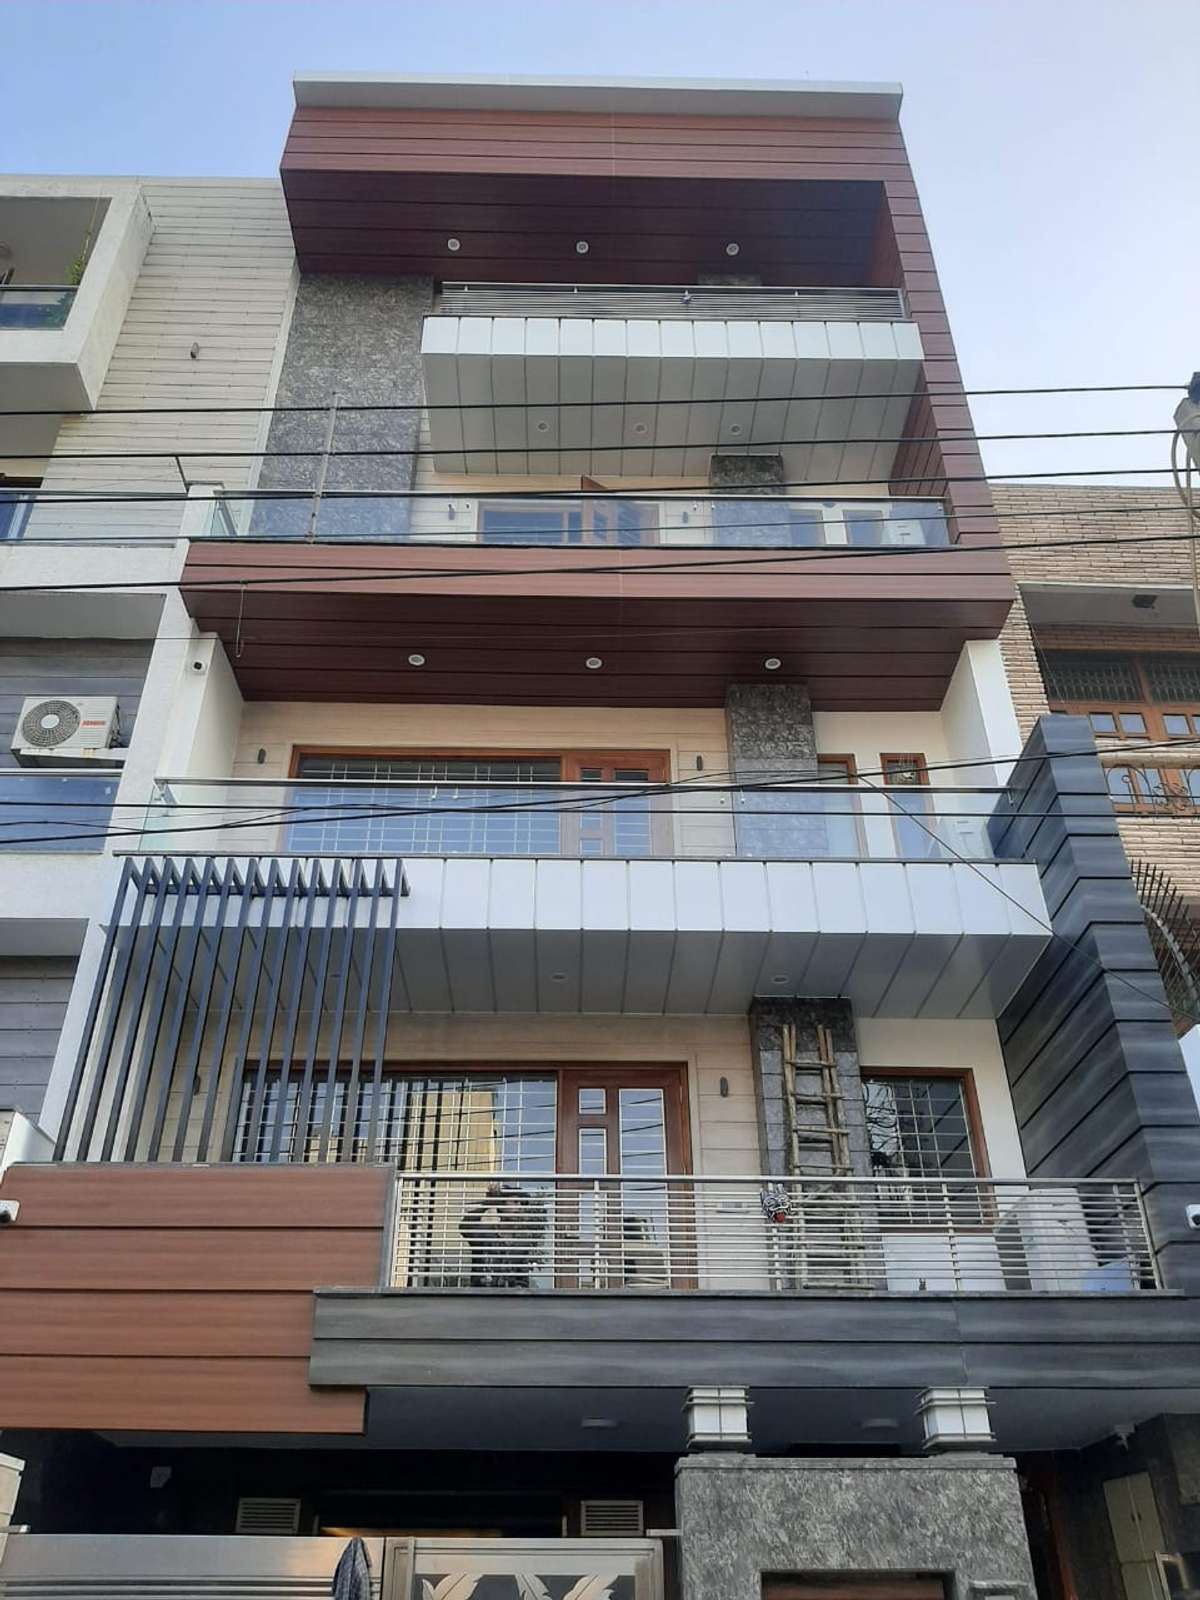 design and concept by TCA. from render to reality ðŸ�˜ï¸� #frontElevation  #GlassBalconyRailing  #hplacp  #HPL  #msfabrications  #lighting  #architecturedesigns  #InteriorDesigner  
